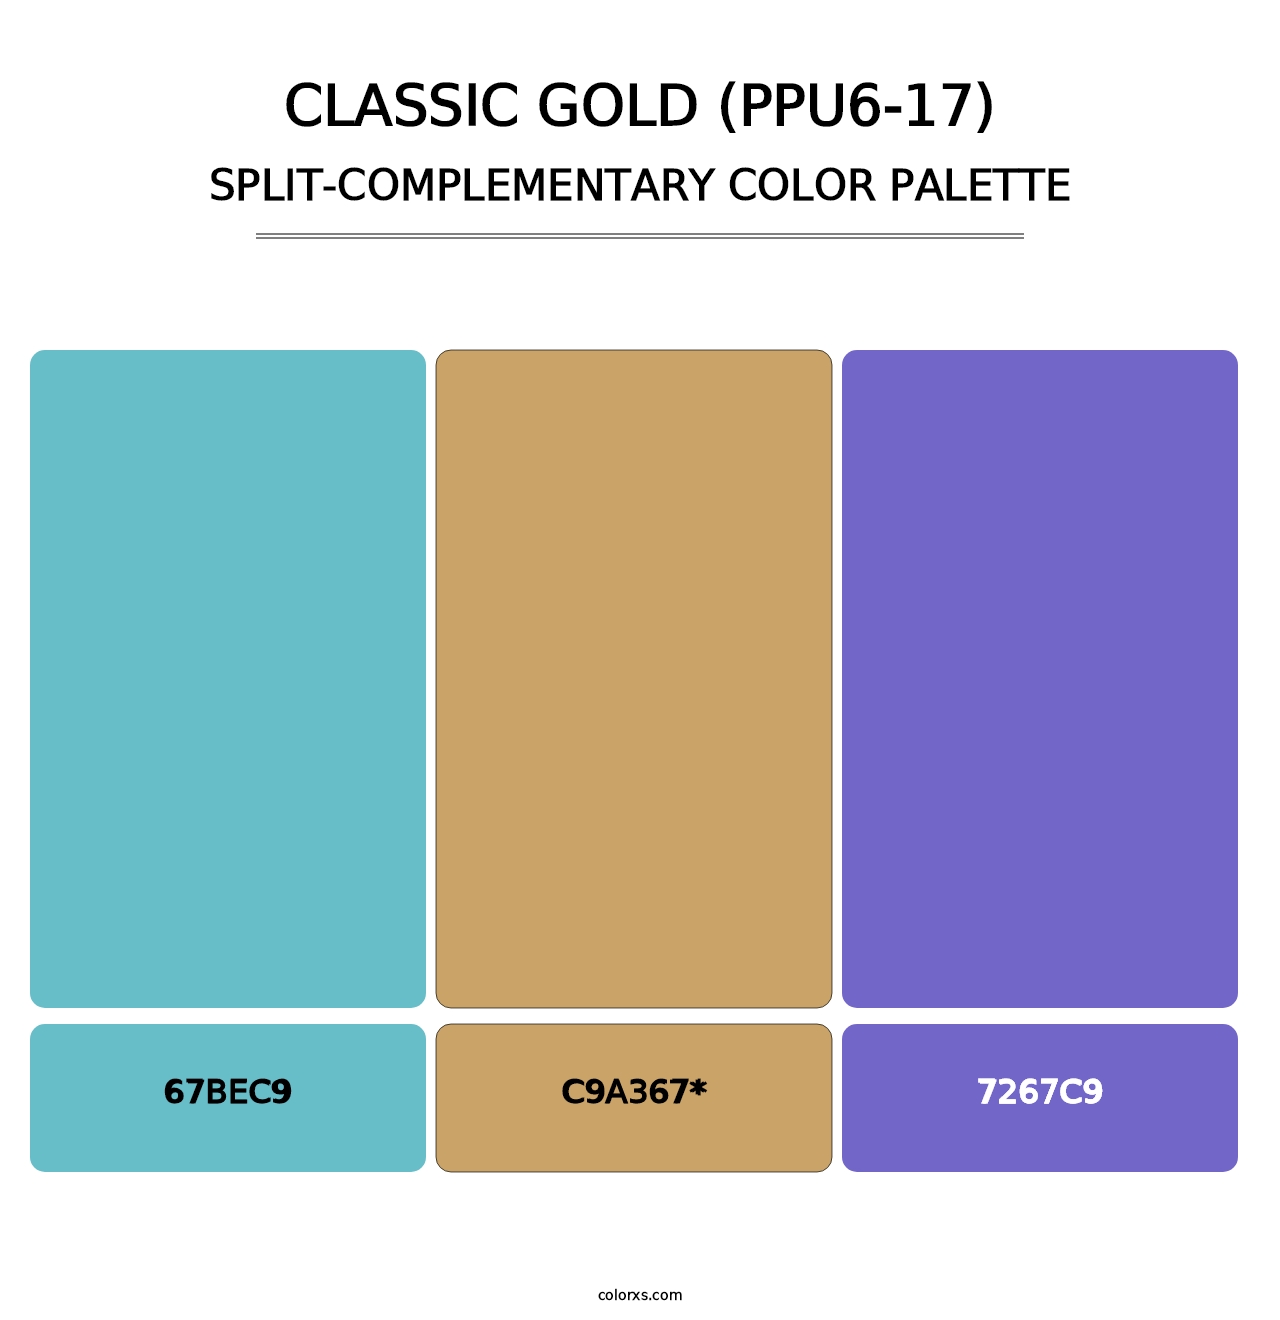 Classic Gold (PPU6-17) - Split-Complementary Color Palette